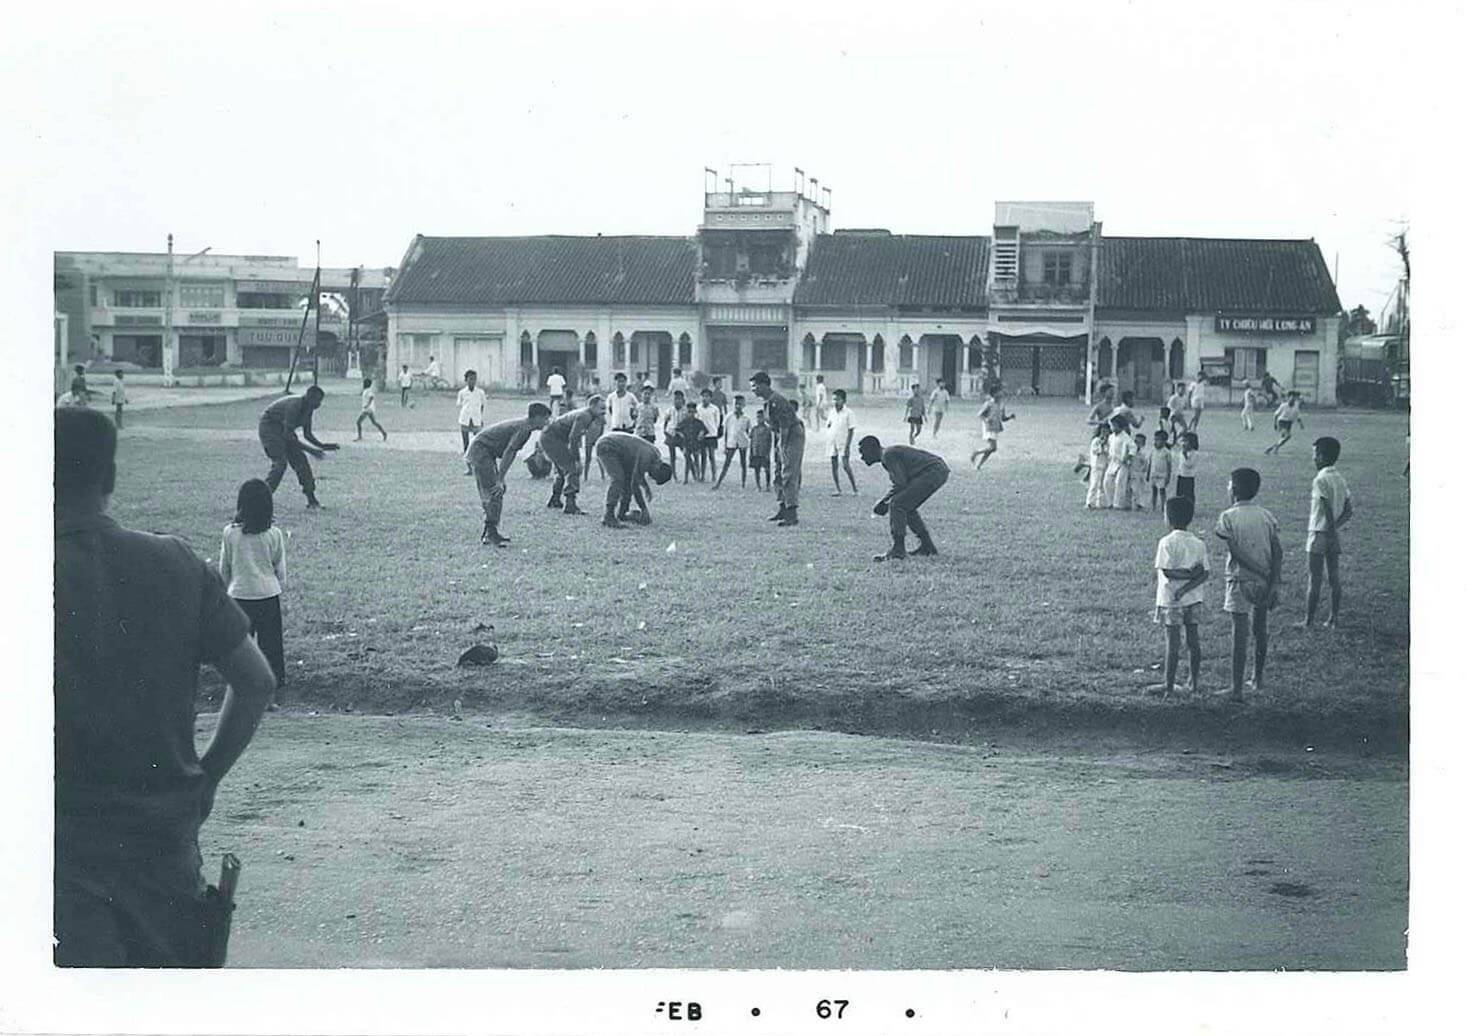 U.S. soldiers playing football while a crowd of Asian children observe. Photo dated Feb 67.